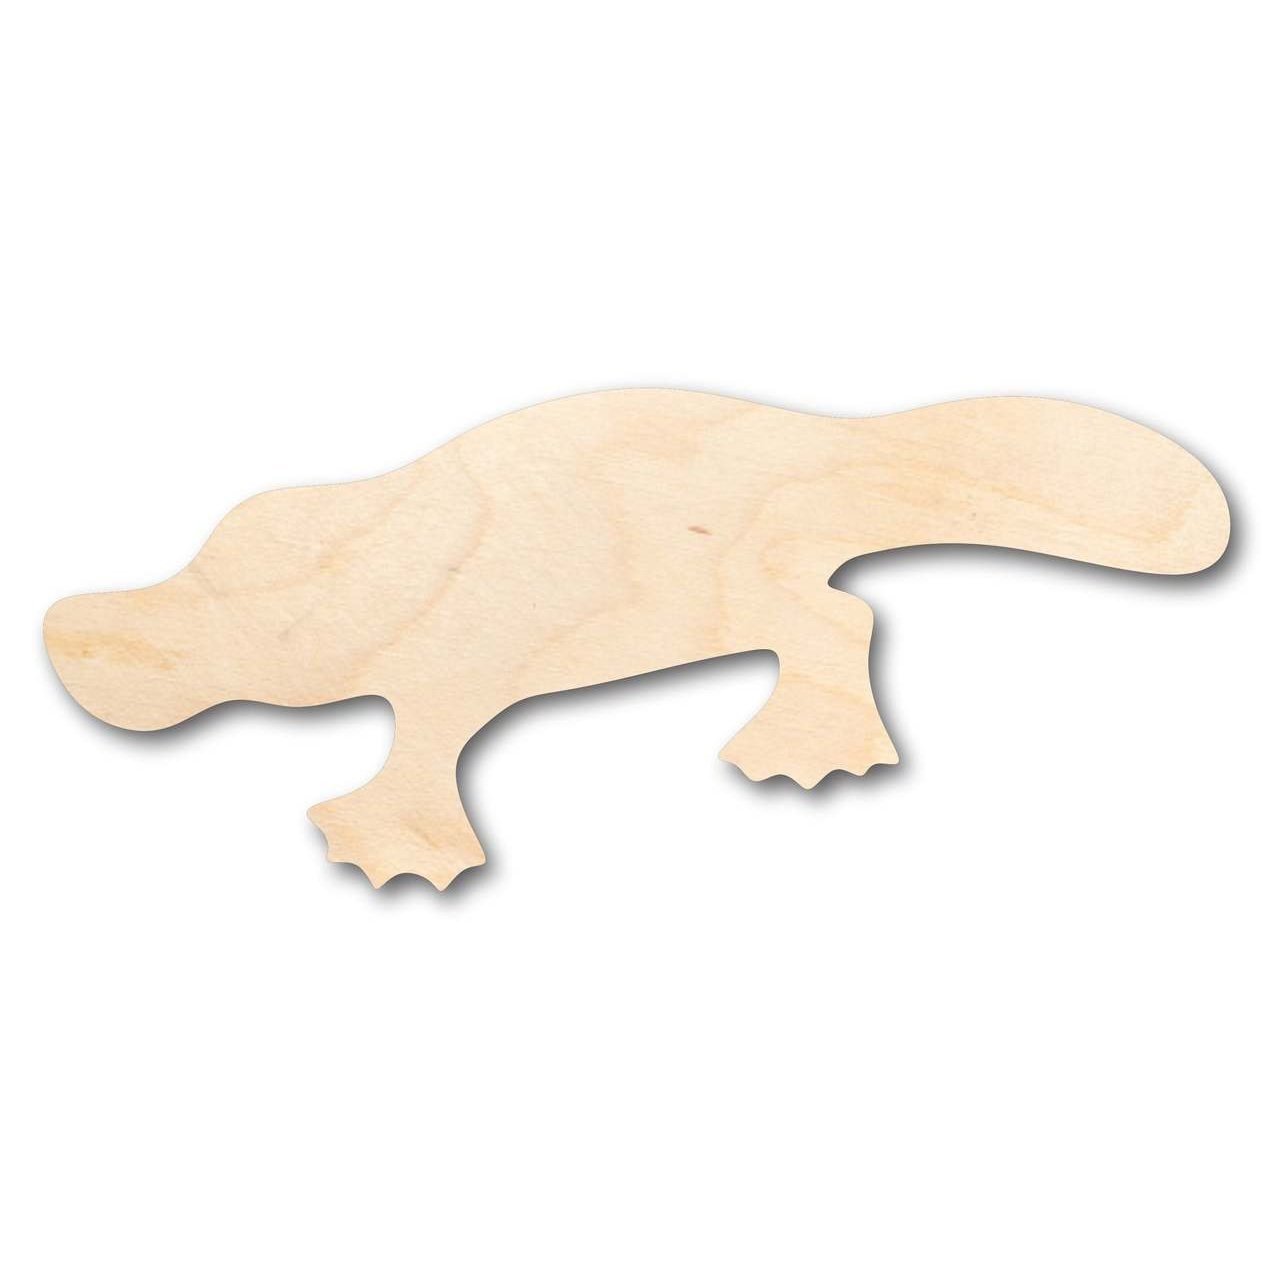 Unfinished Wooden Platypus Shape - Animal - Craft - up to 24